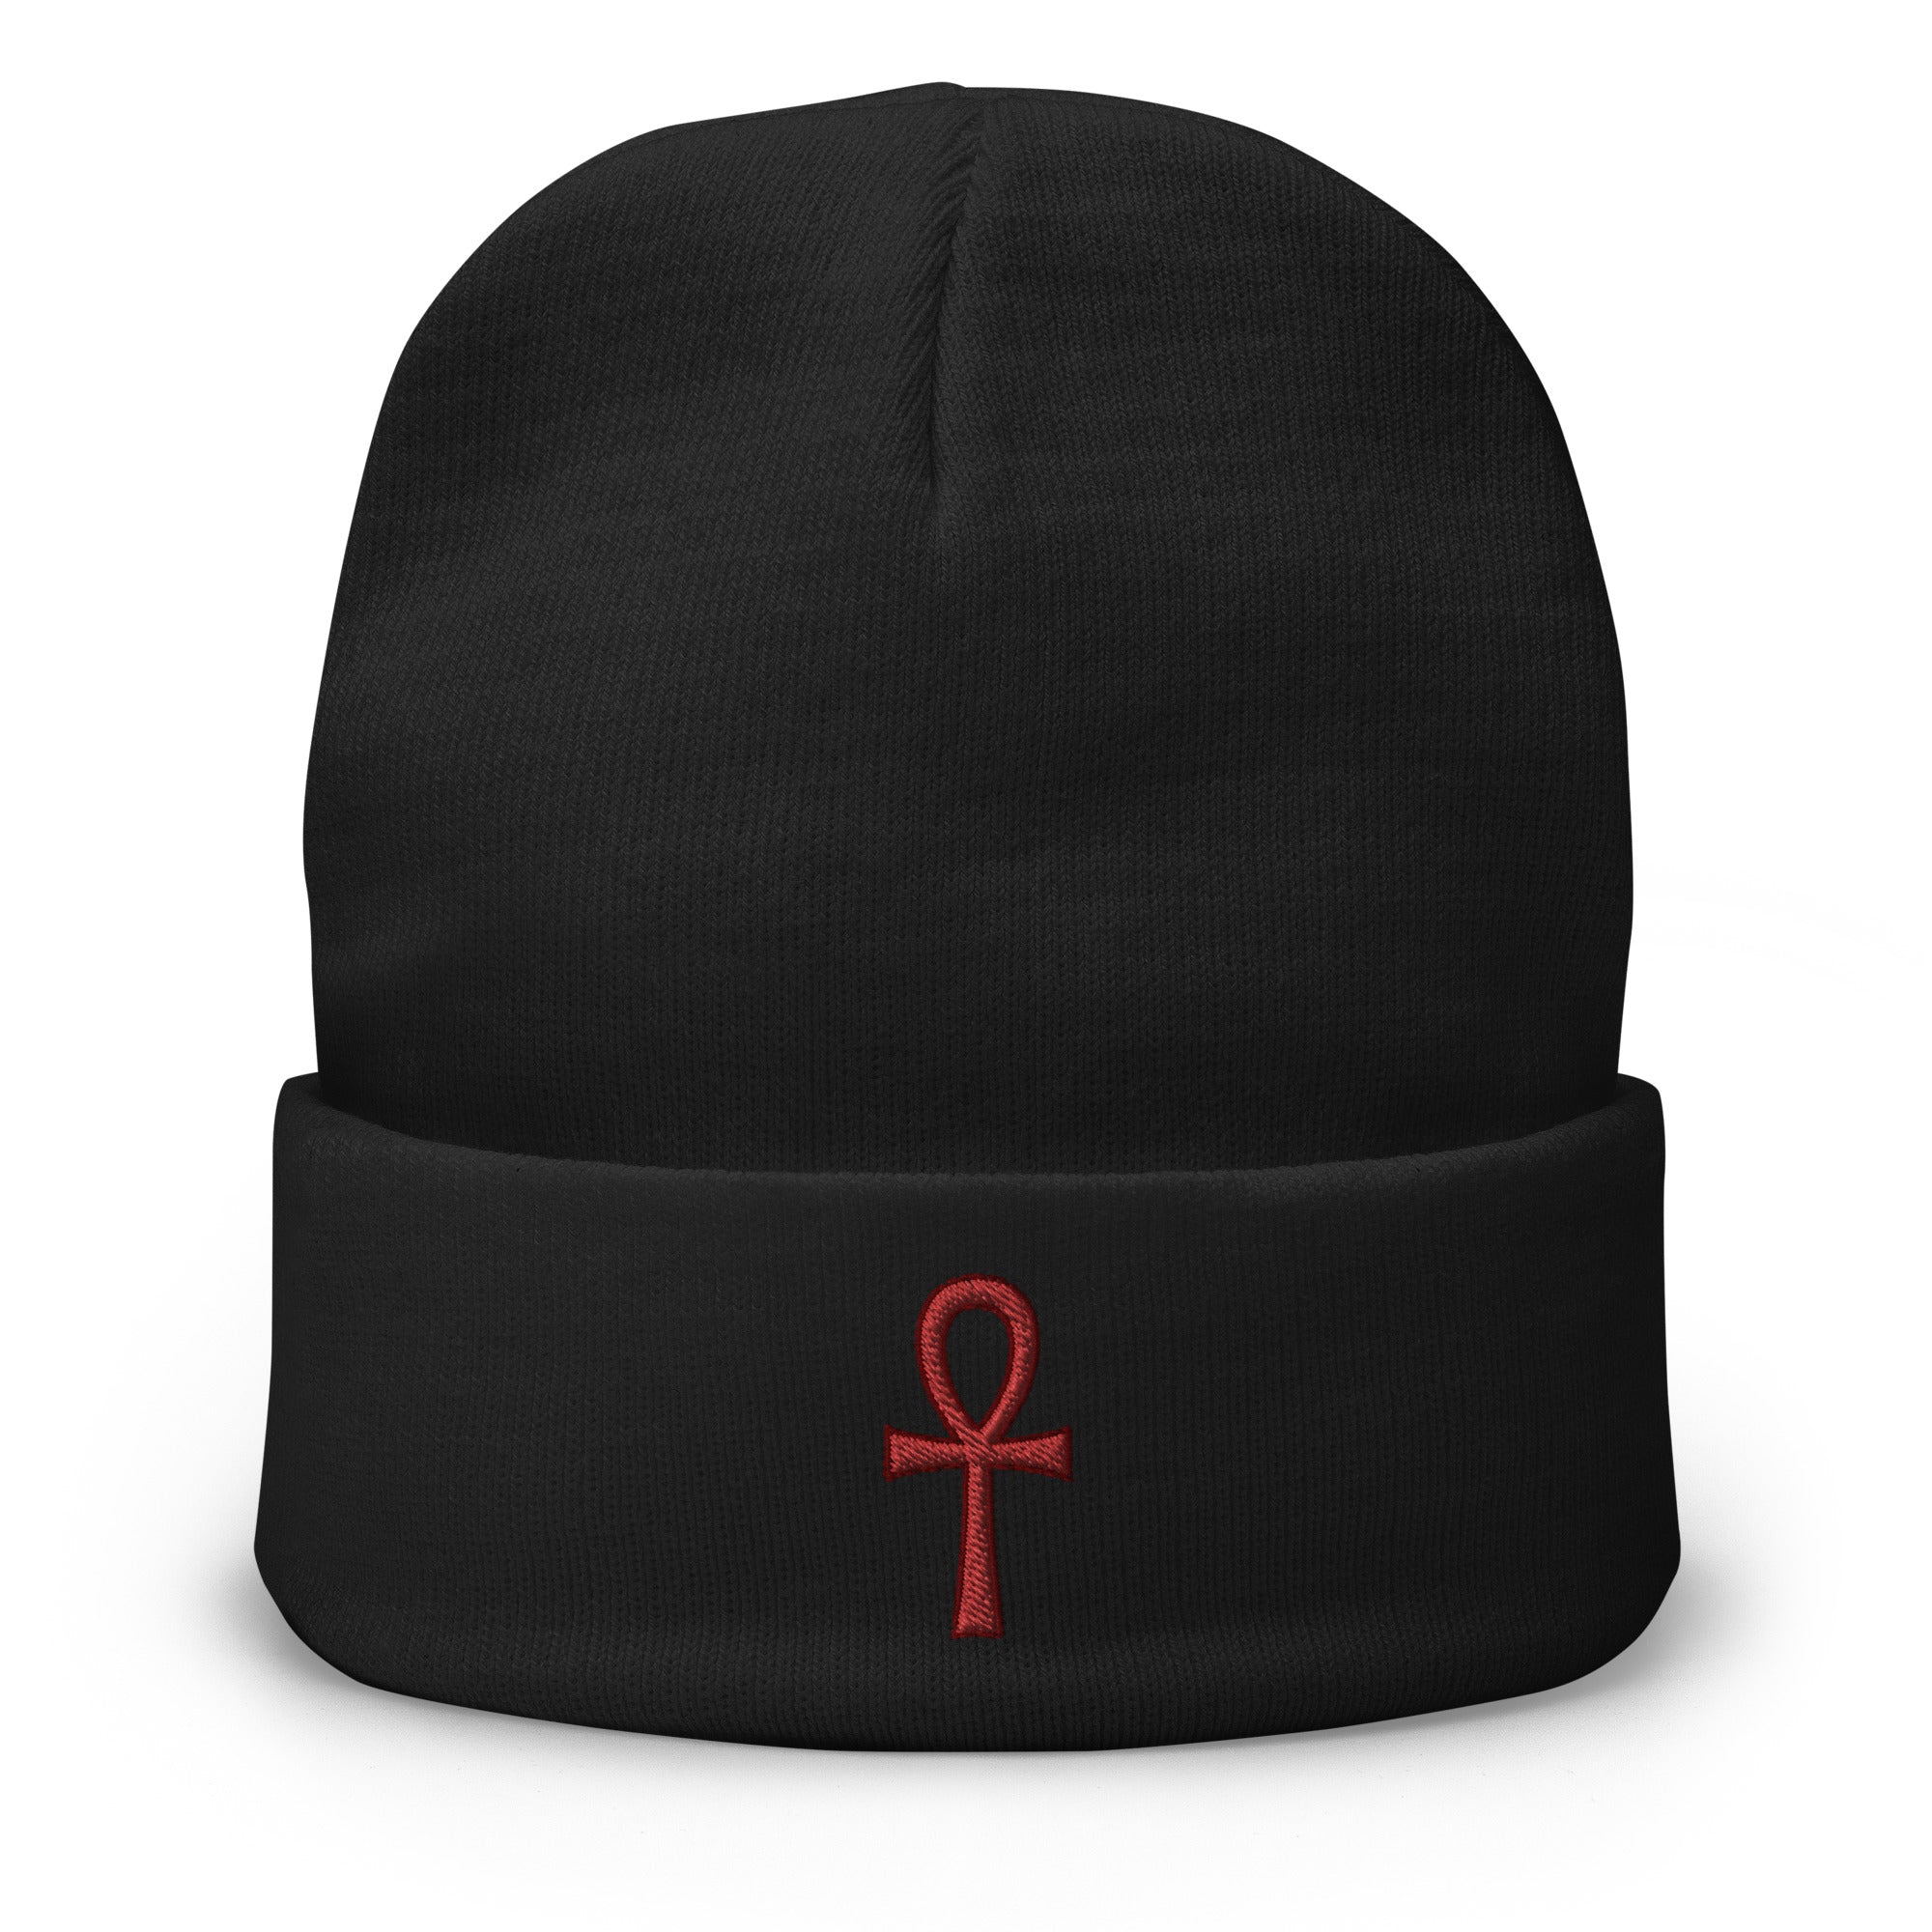 The Key of Life Ankh Ancient Egyptian Culture Embroidered Cuff Beanie Red Thread - Edge of Life Designs